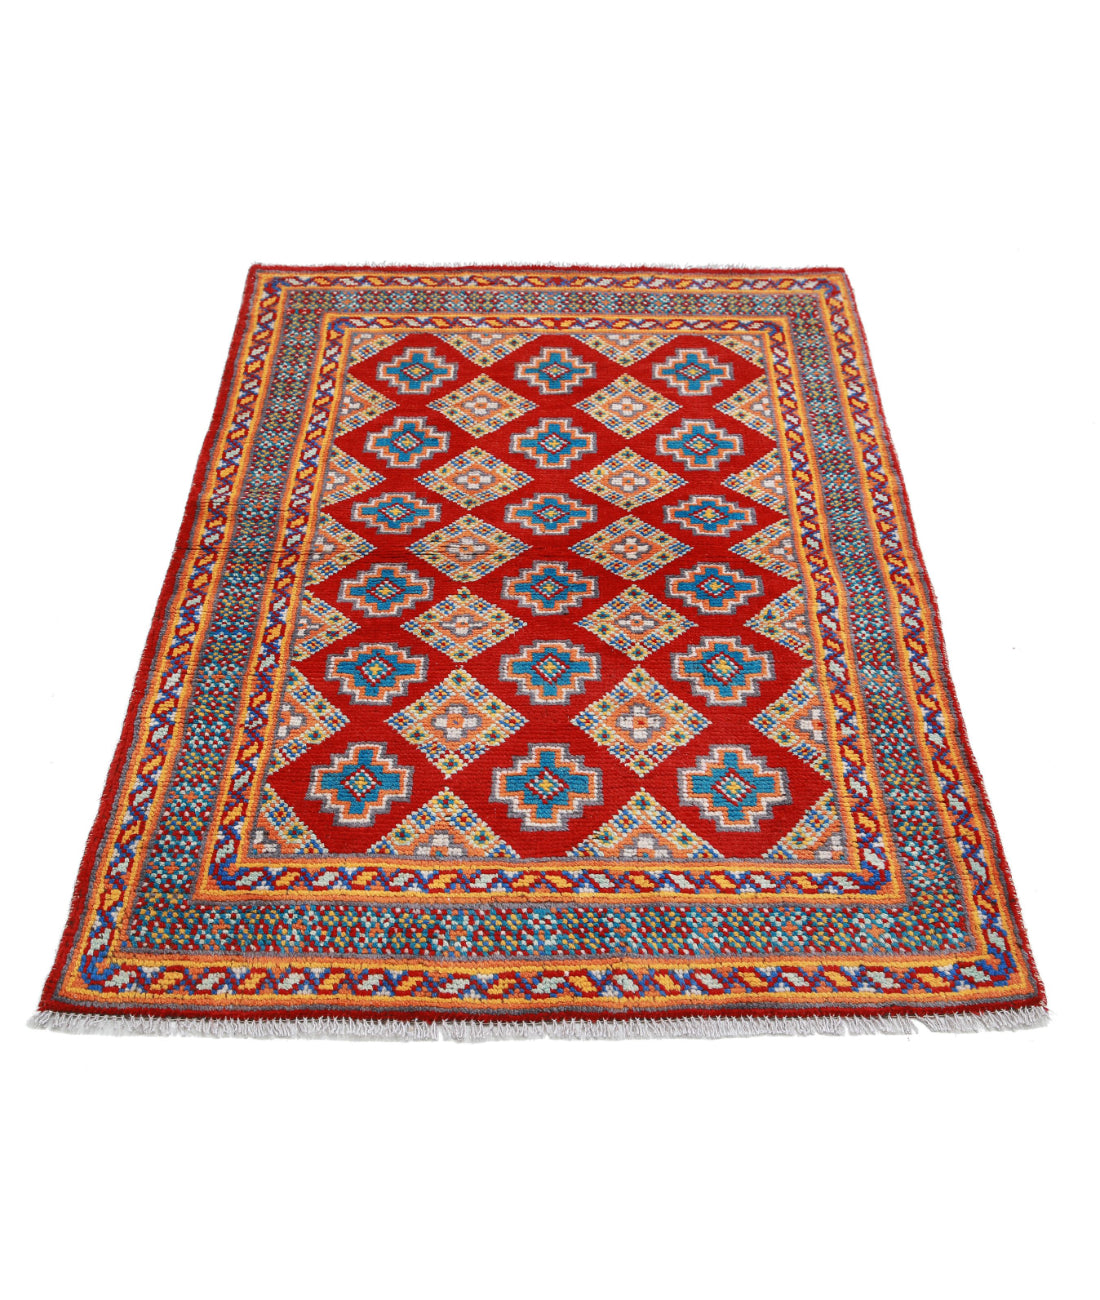 Revival 3'3'' X 4'11'' Hand-Knotted Wool Rug 3'3'' x 4'11'' (98 X 148) / Red / Blue